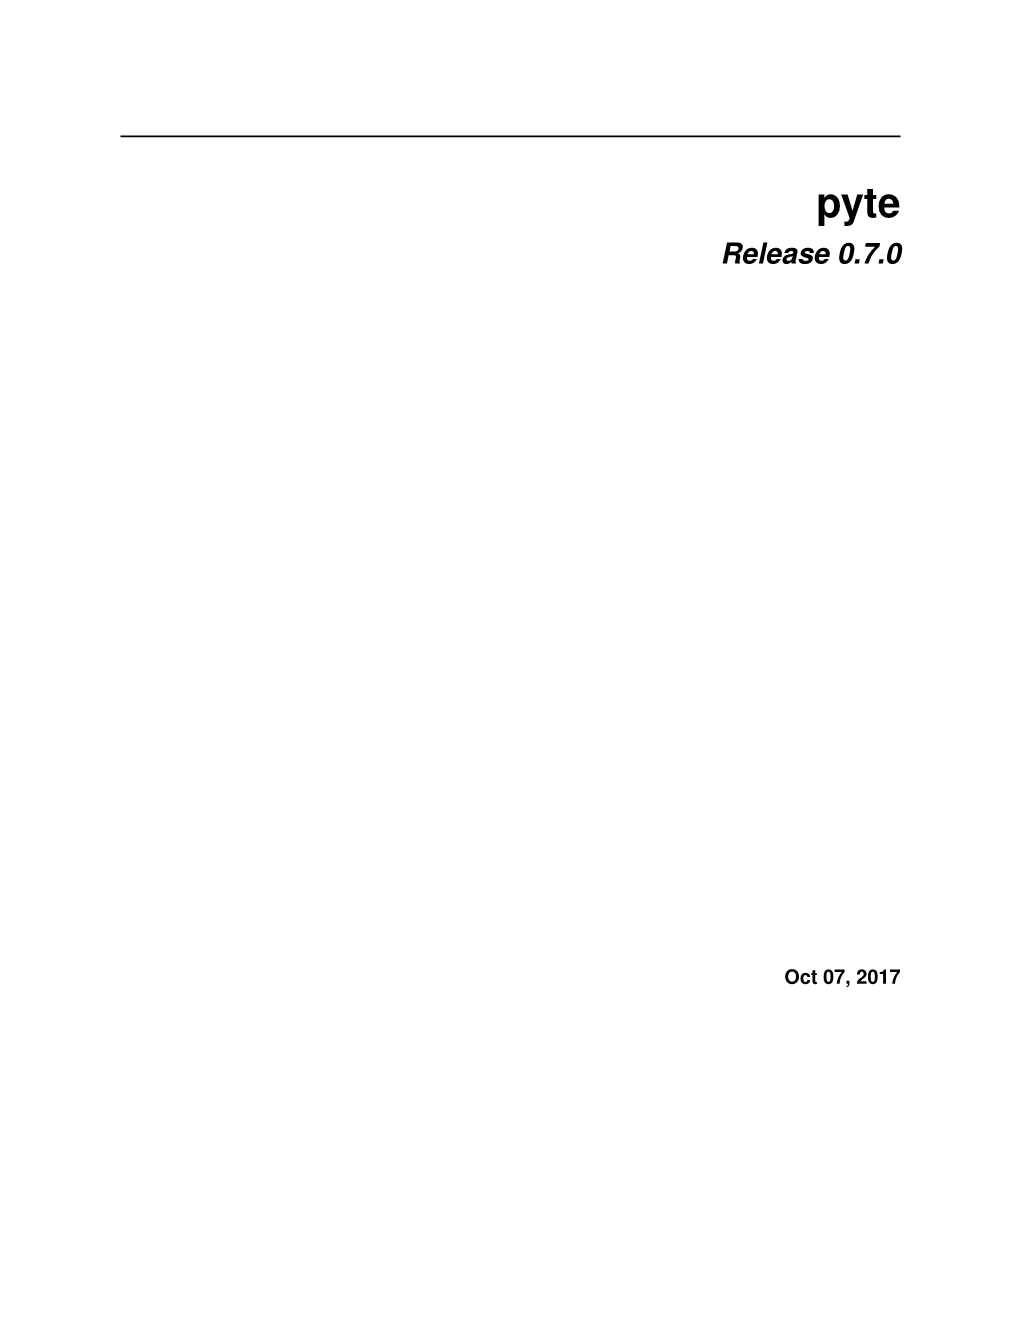 Pyte Release 0.7.0